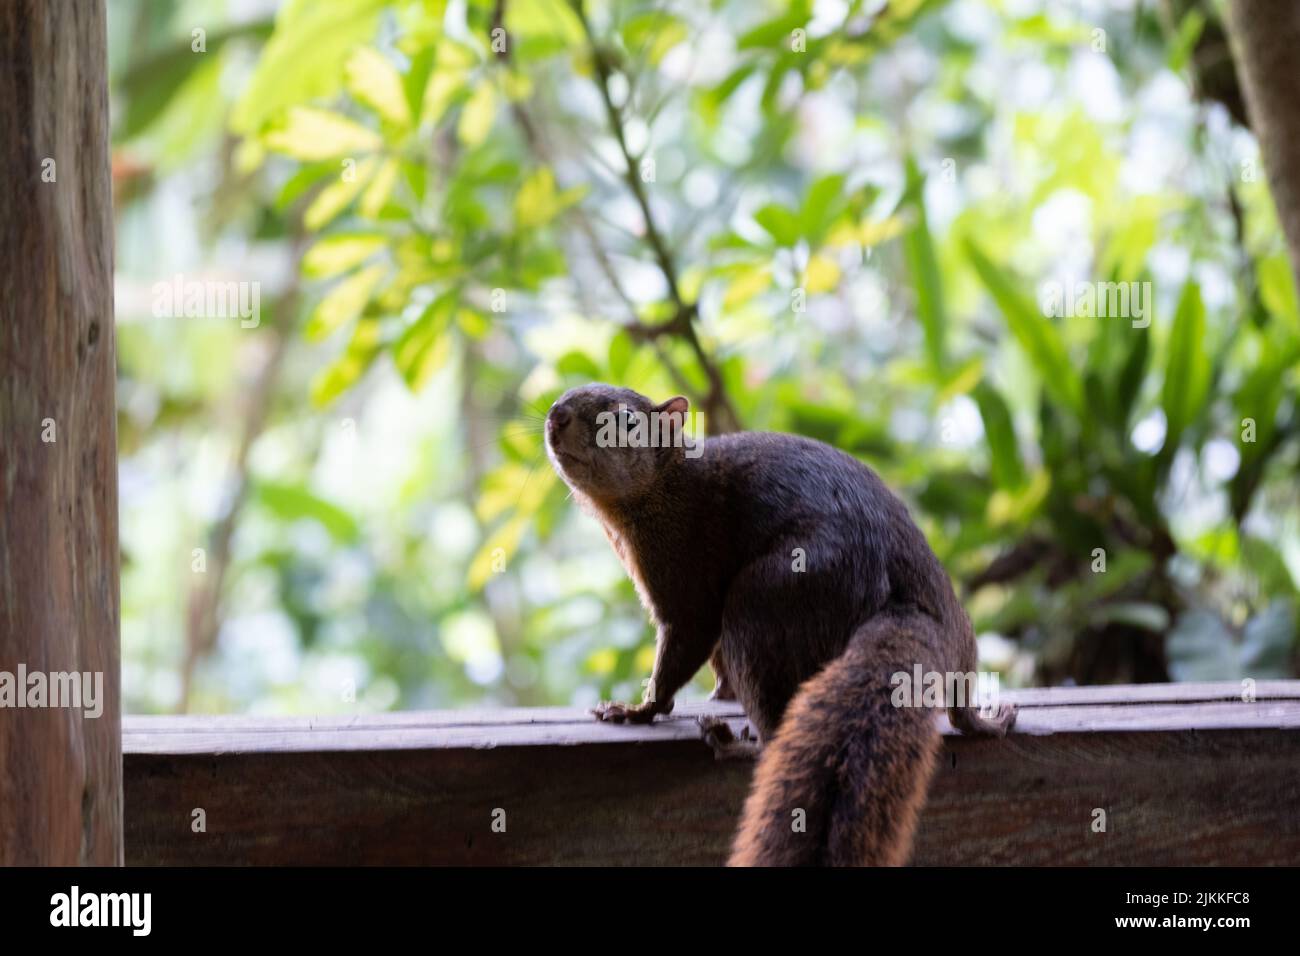 A closeup shot of a pallas's squirrel standing on a wooden fence at the park on a sunny day with blurred background Stock Photo